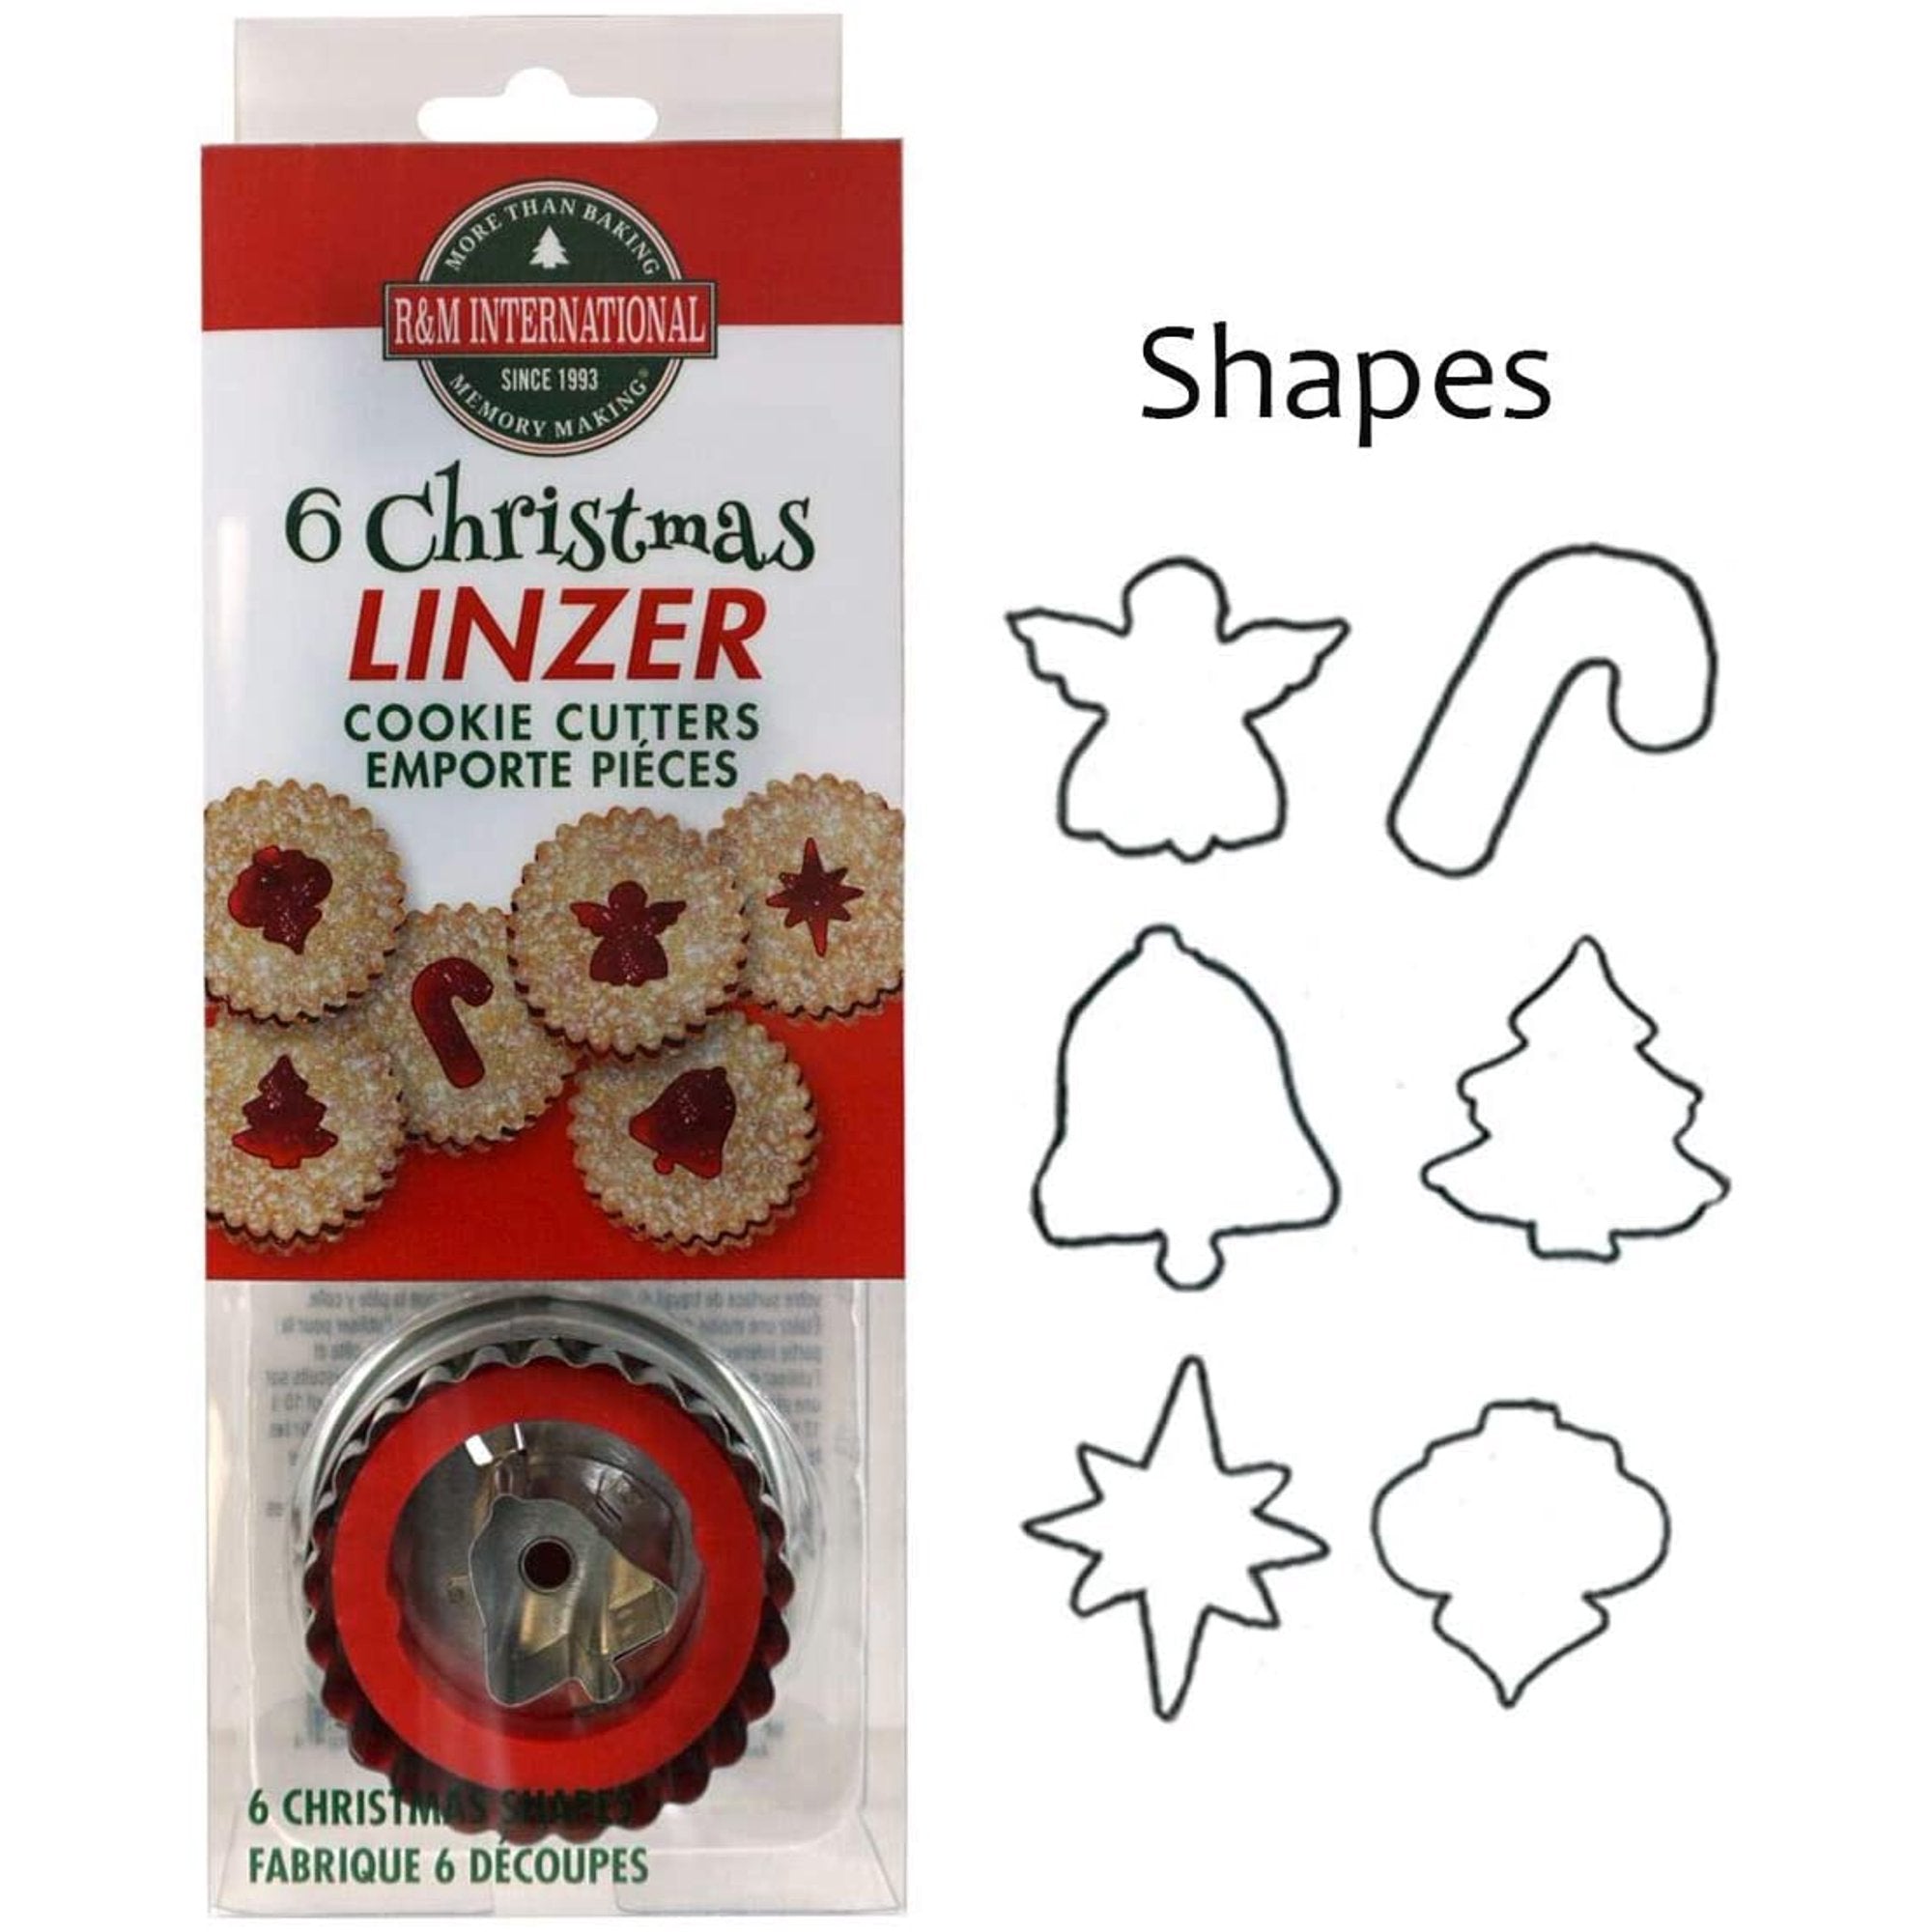 LINZER Cookie Cutter or Tart Set with 6 Shapes!